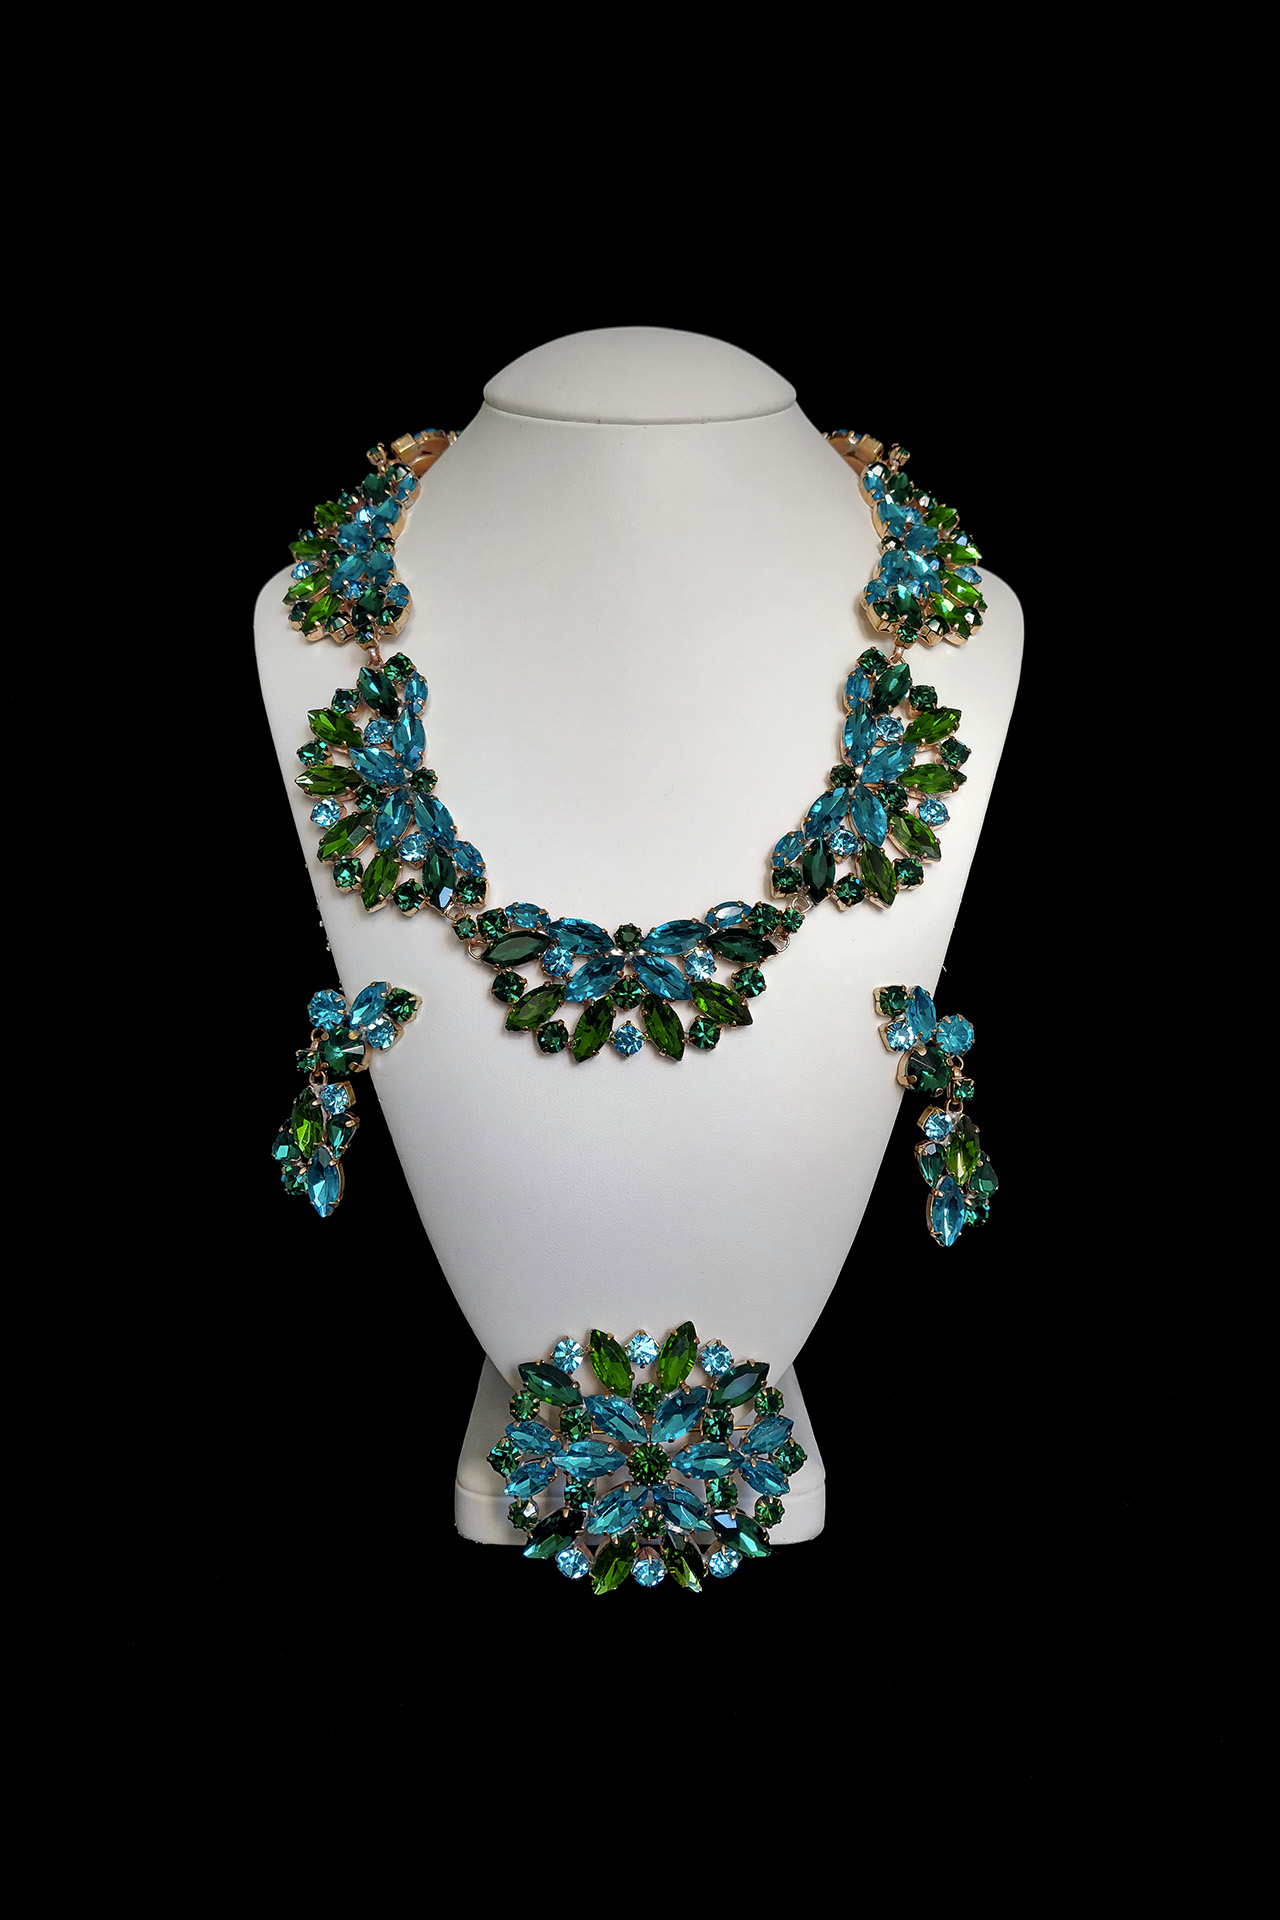 Handcrafted earrings and necklace set Fantaisie - green and aqua